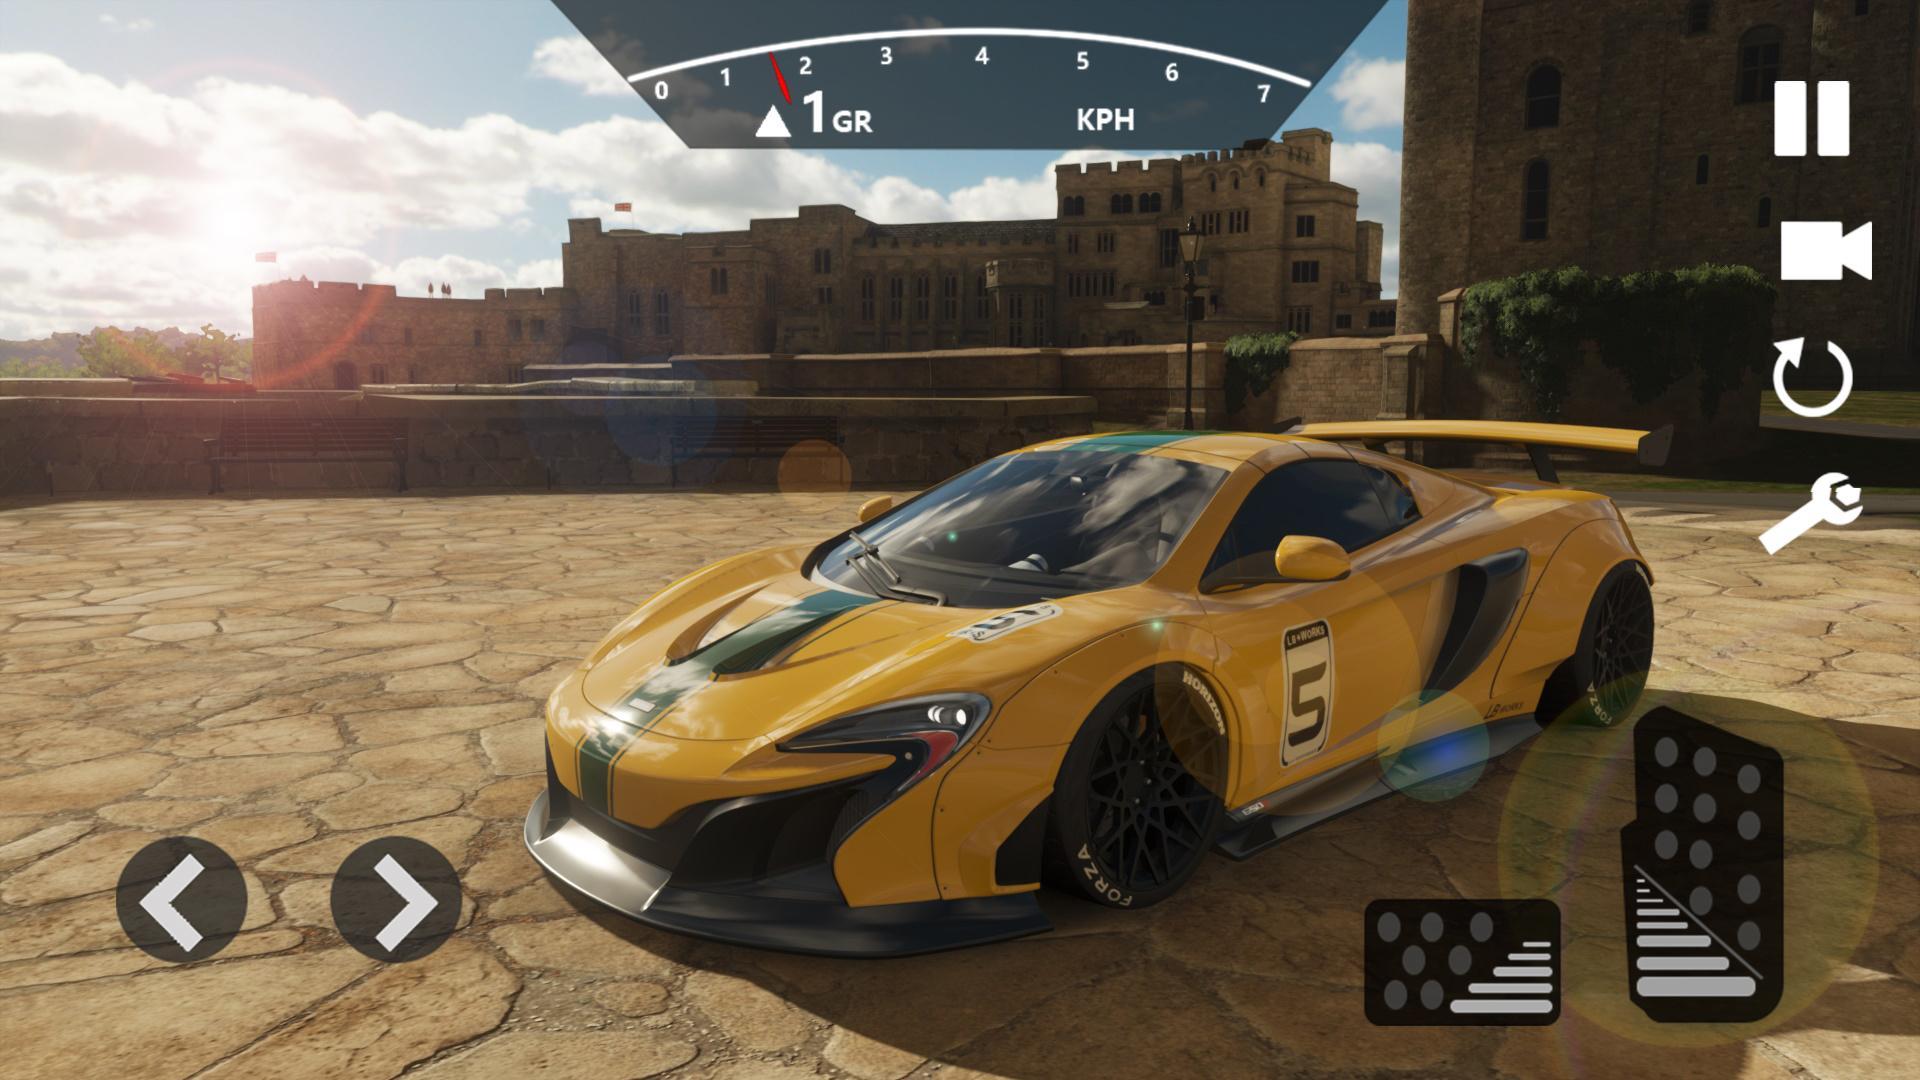 Crazy Car Driving City Stunts 650s For Android Apk Download